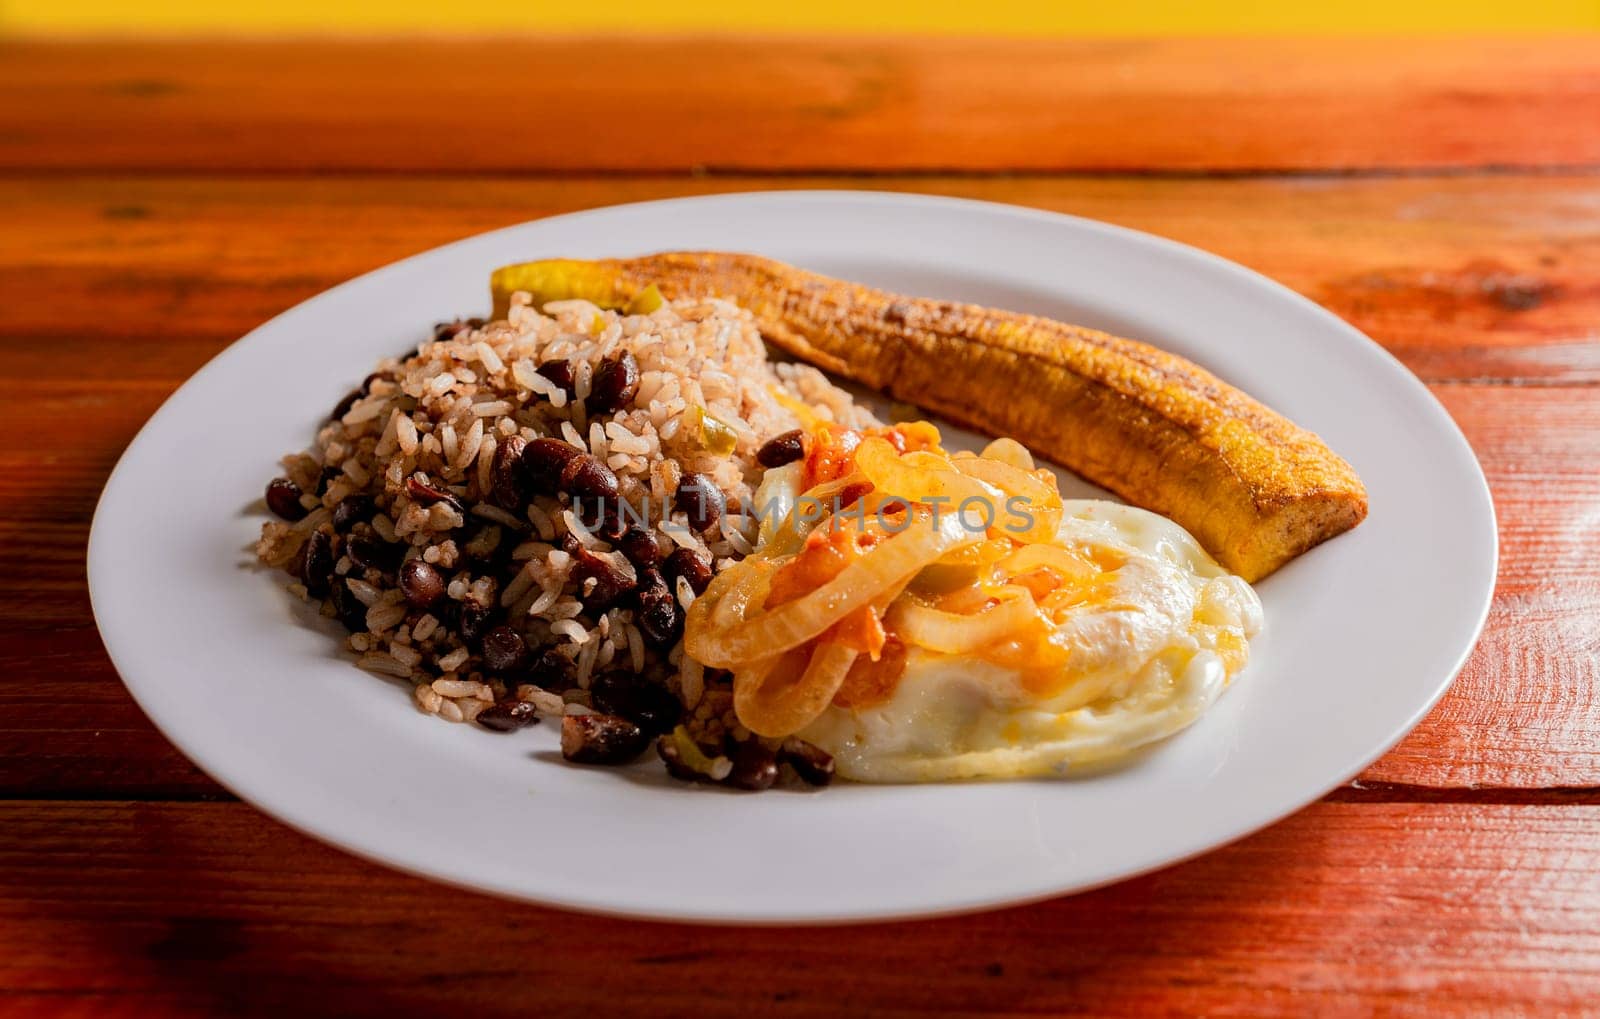 Gallopinto dish with ripe and fried eggs served on wooden table. Gallopinto breakfast with fried eggs and maduro on the table. Concept of typical foods of Latin America